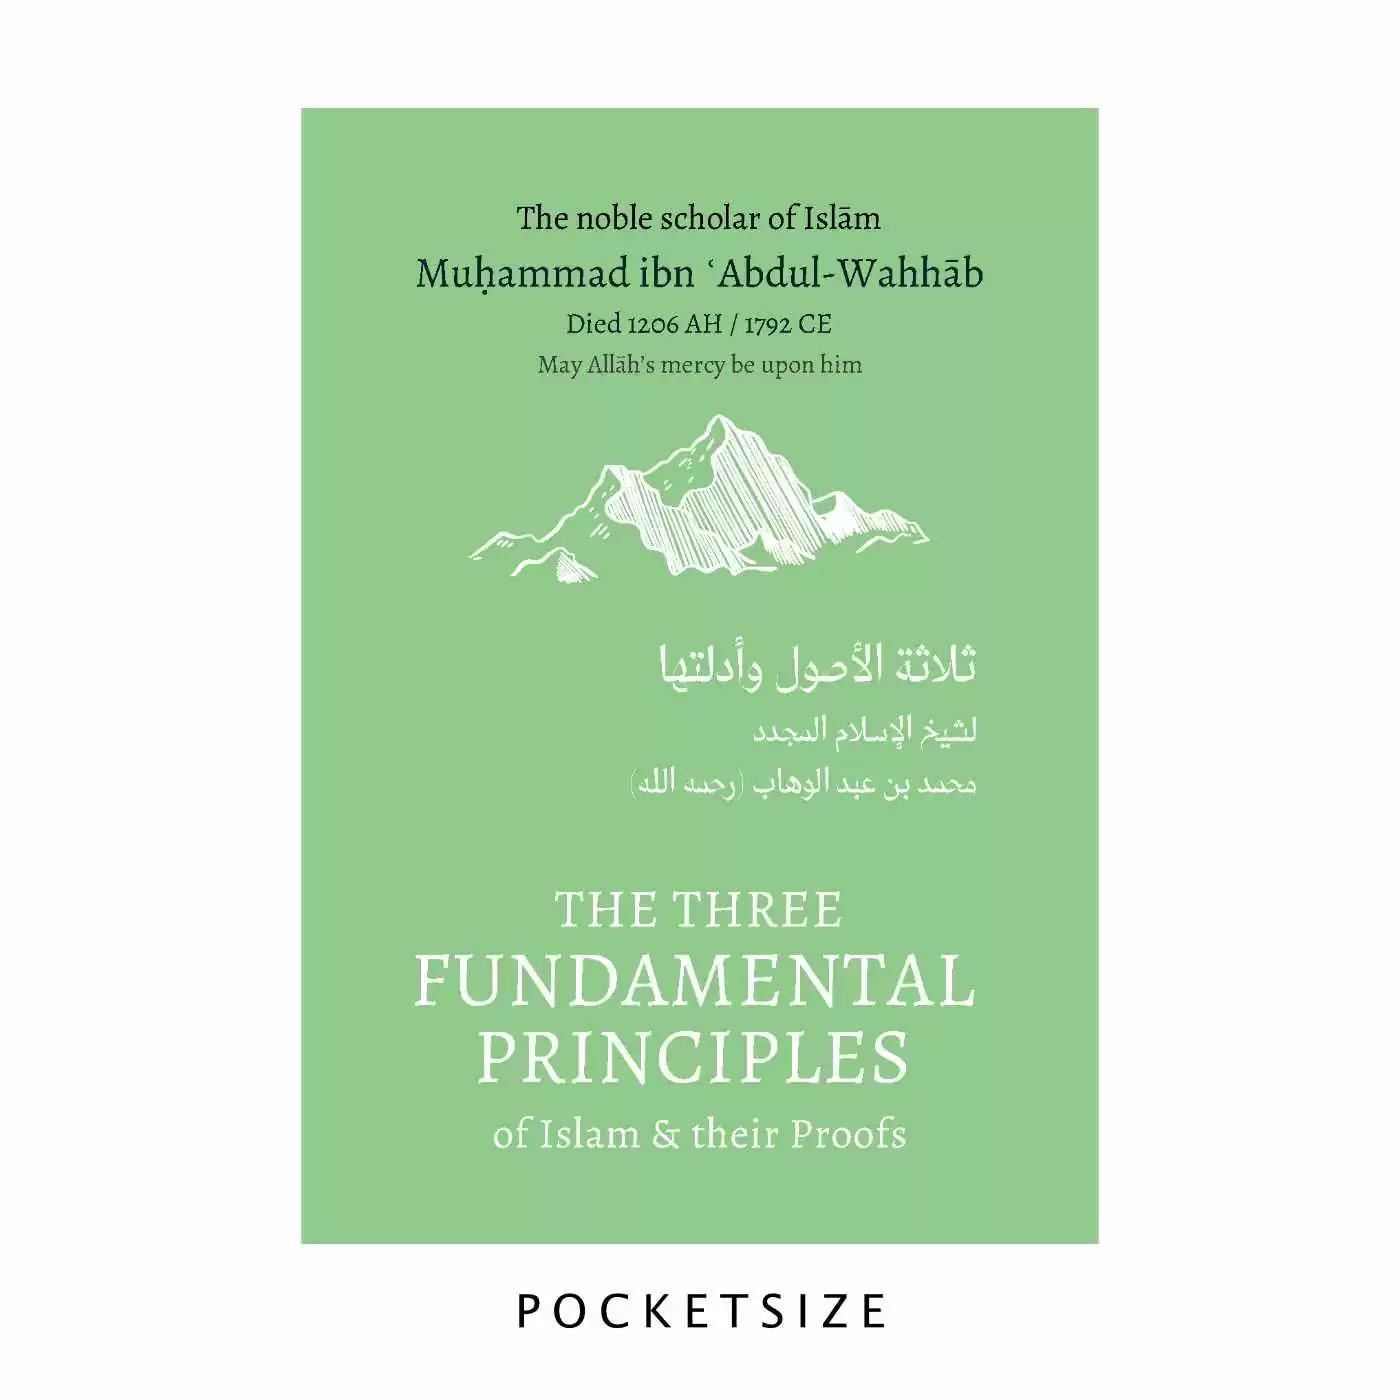 The Three Fundamental Principles Of Islam & Their Proofs (Pocket Size)